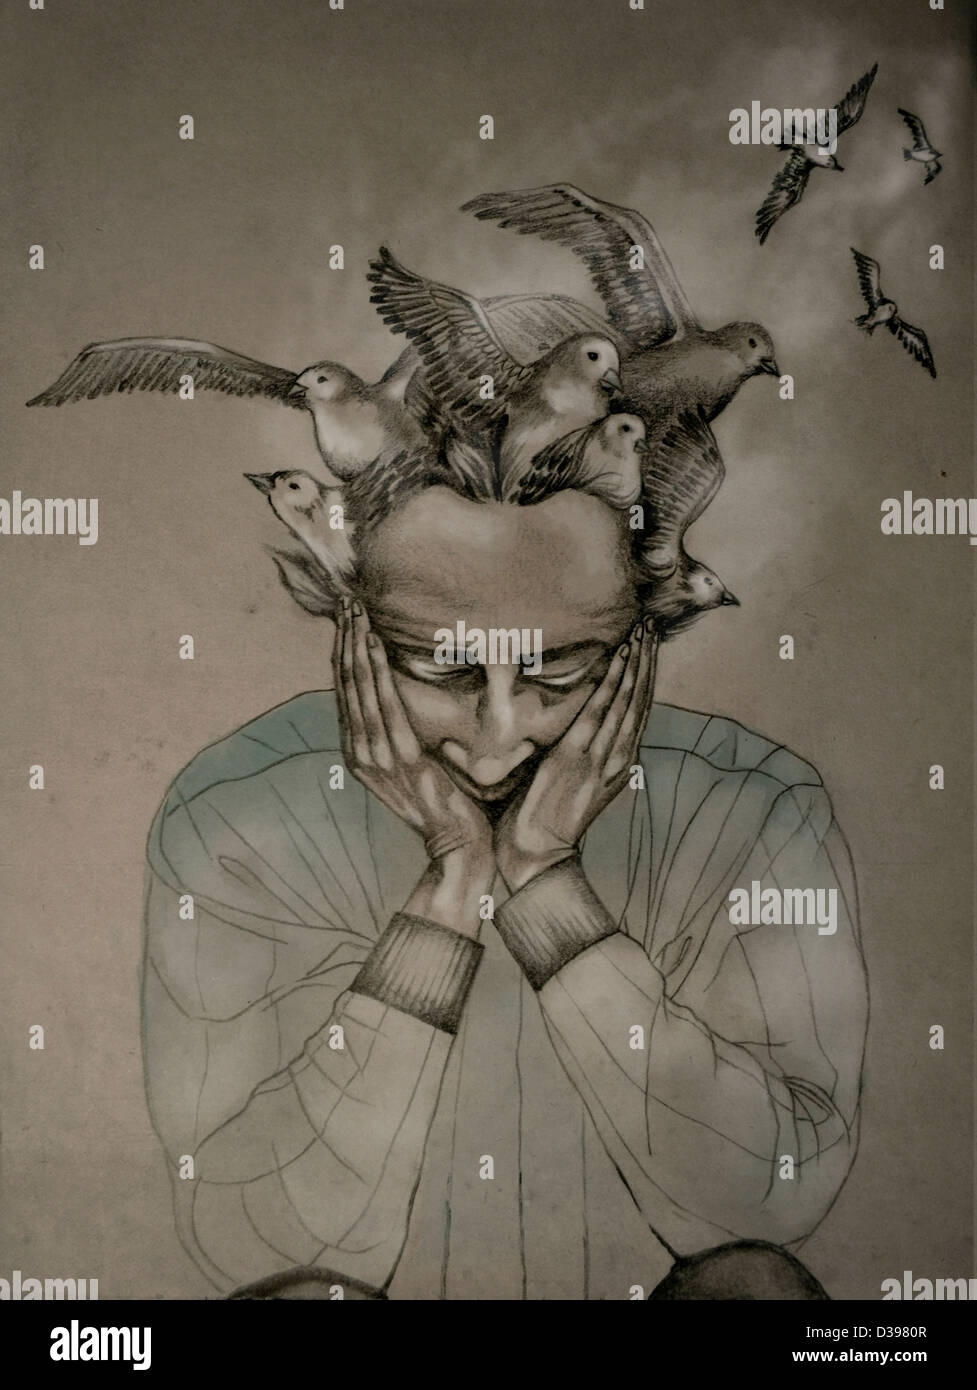 Birds flying from head of a man depicting Alzheimer's disease Stock Photo